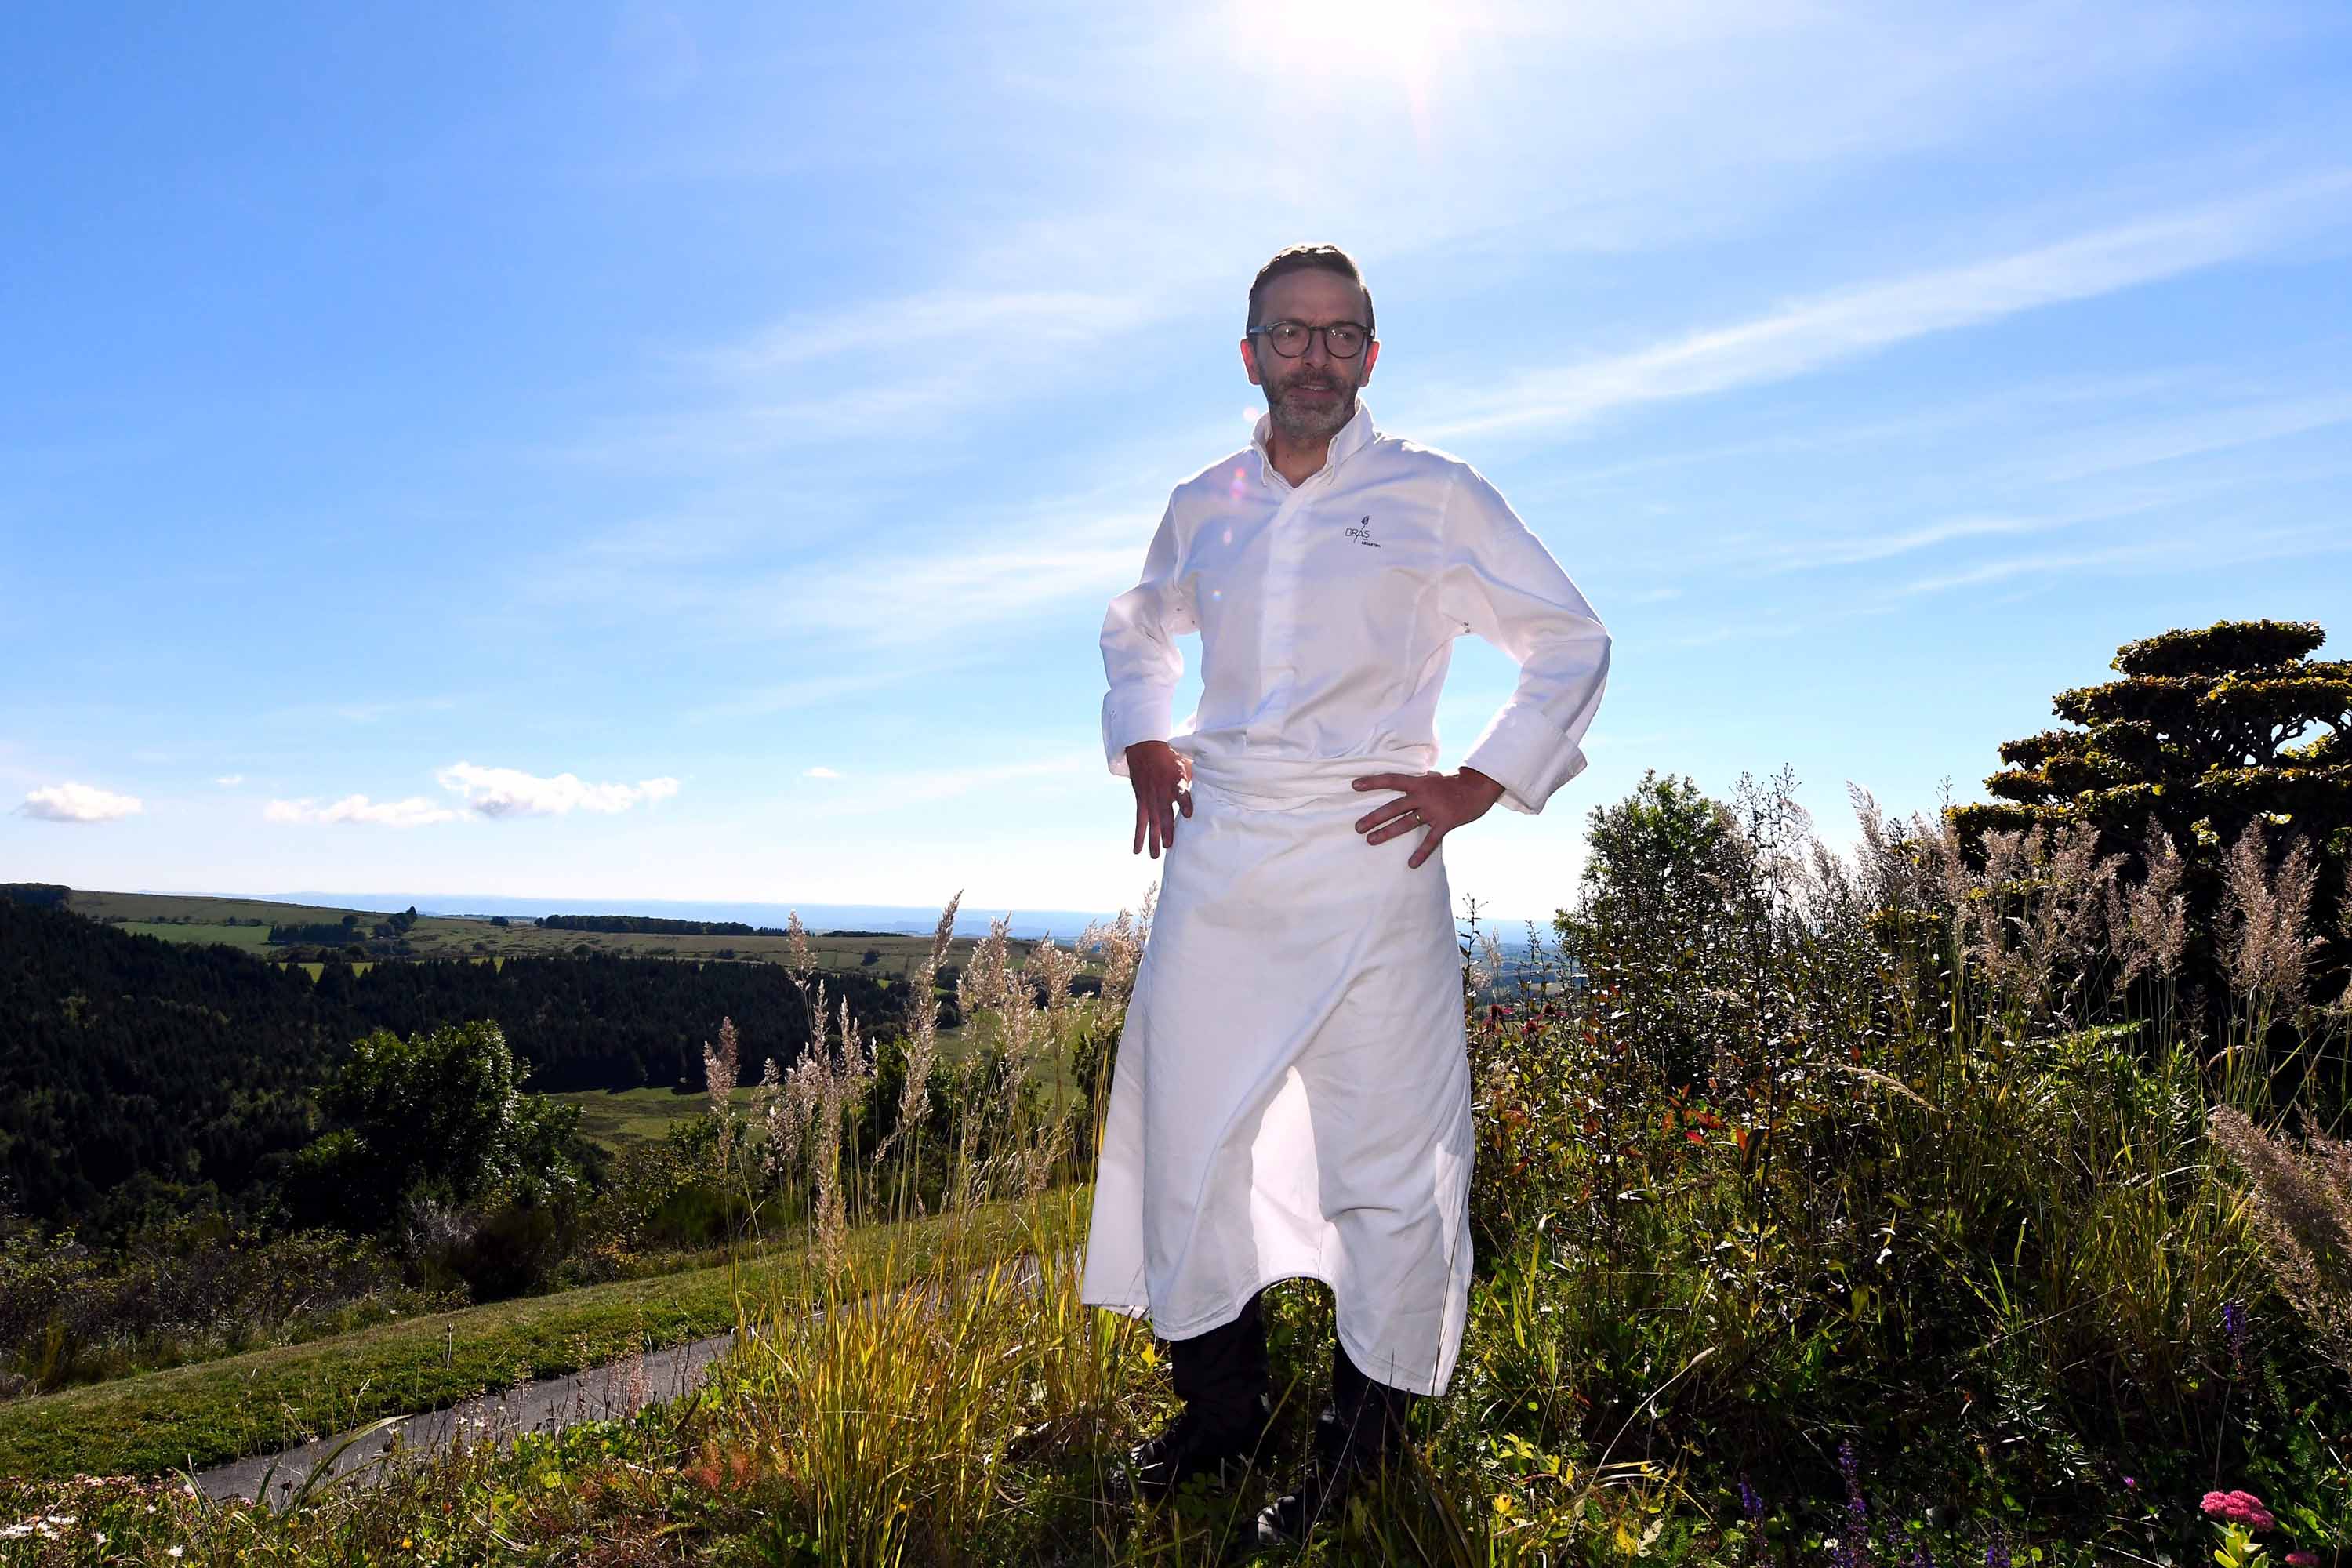 French chef Sébastien Bras asks Michelin to take away his 3 stars